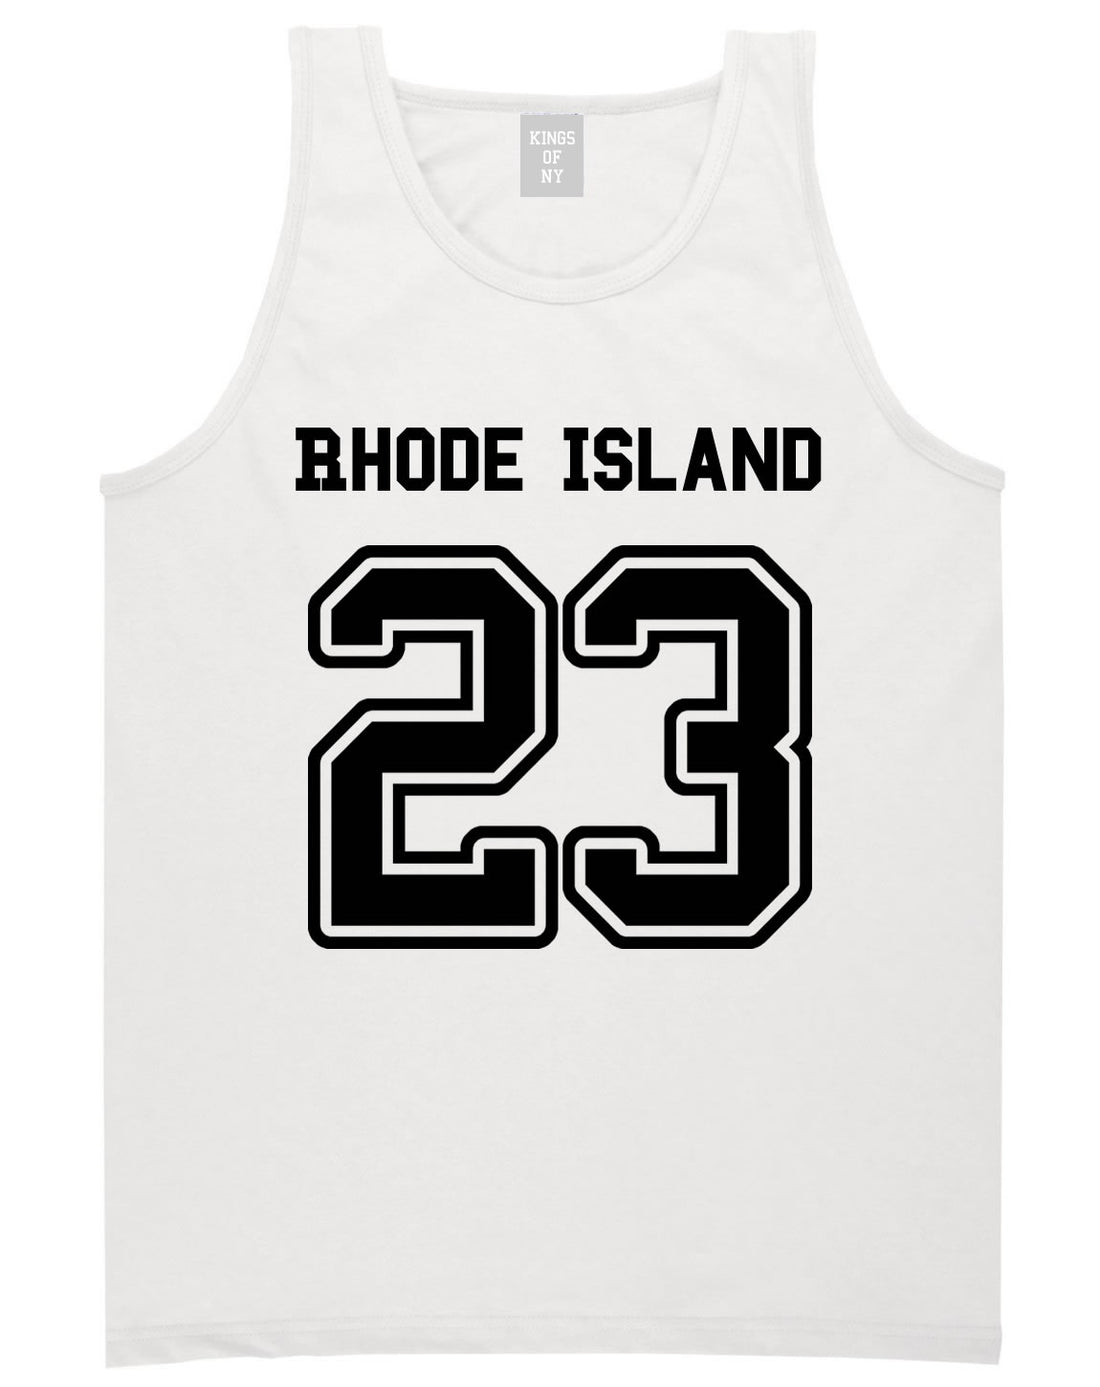 Sport Style Rhode Island 23 Team State Jersey Mens Tank Top By Kings Of NY